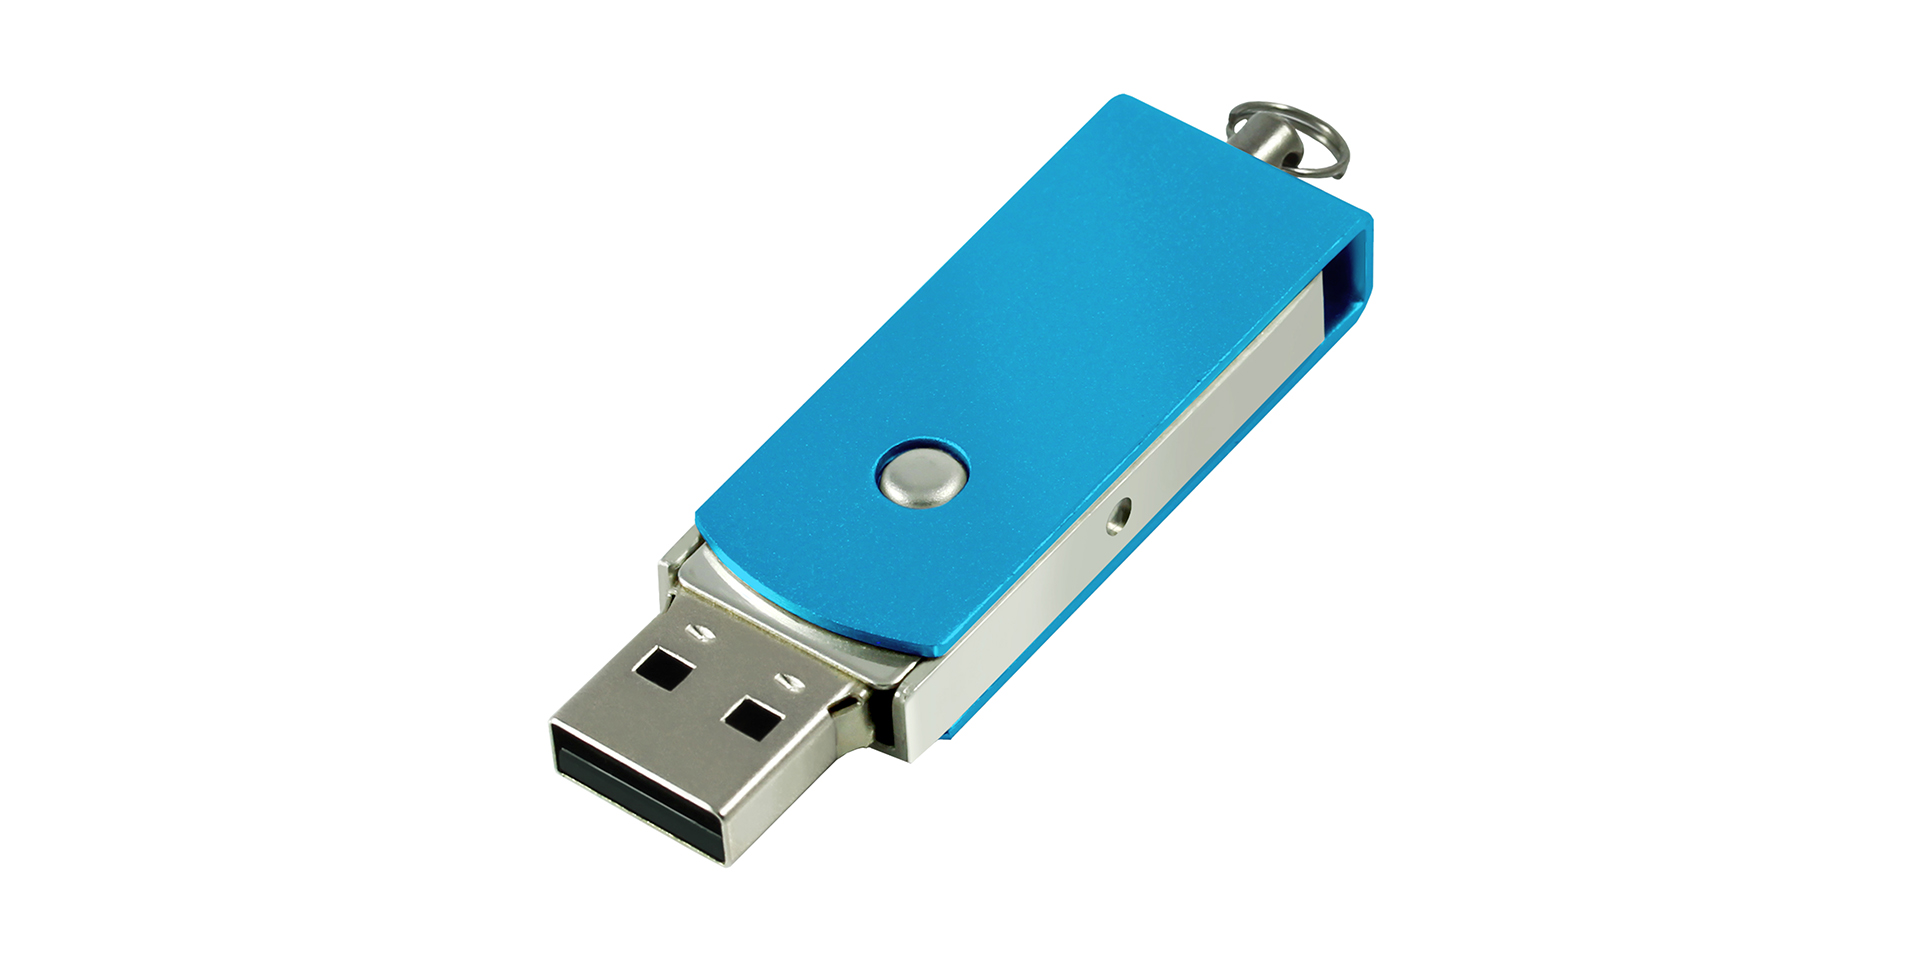 Blue USB as a gift